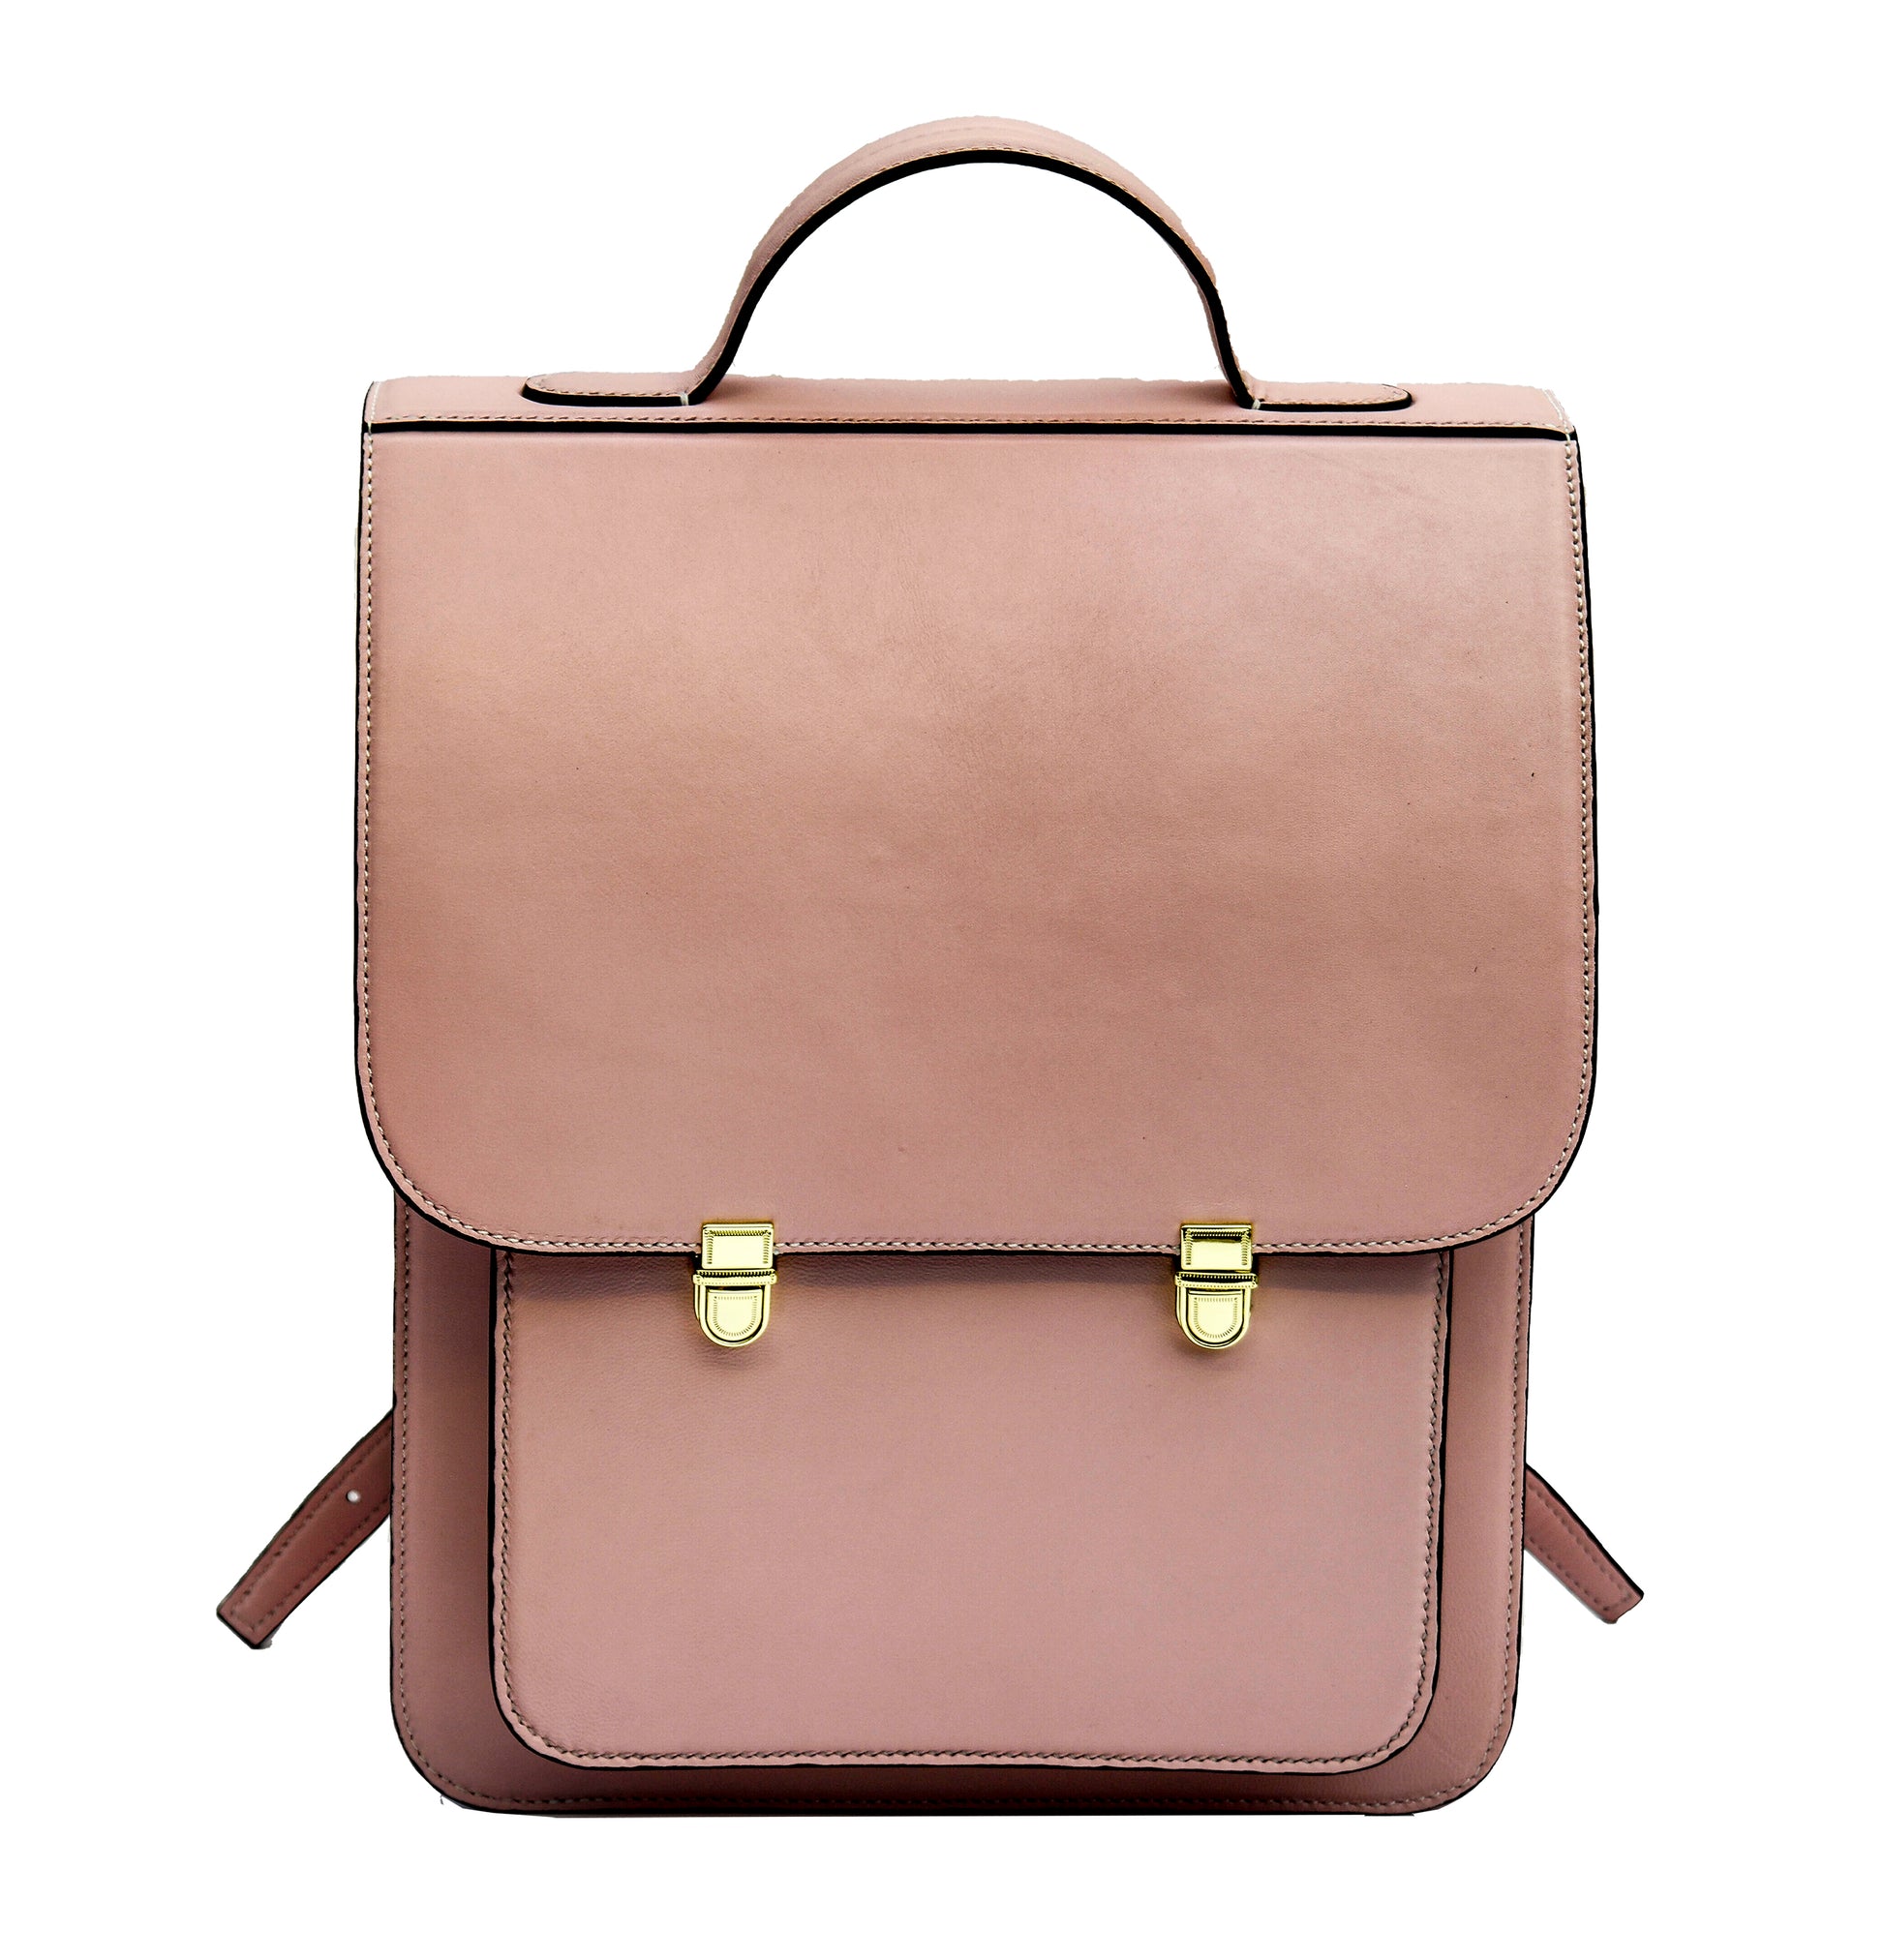 Making a Leather Backpack,Make a pink sheepskin backpack,Classic Leather Backpack,knapsack